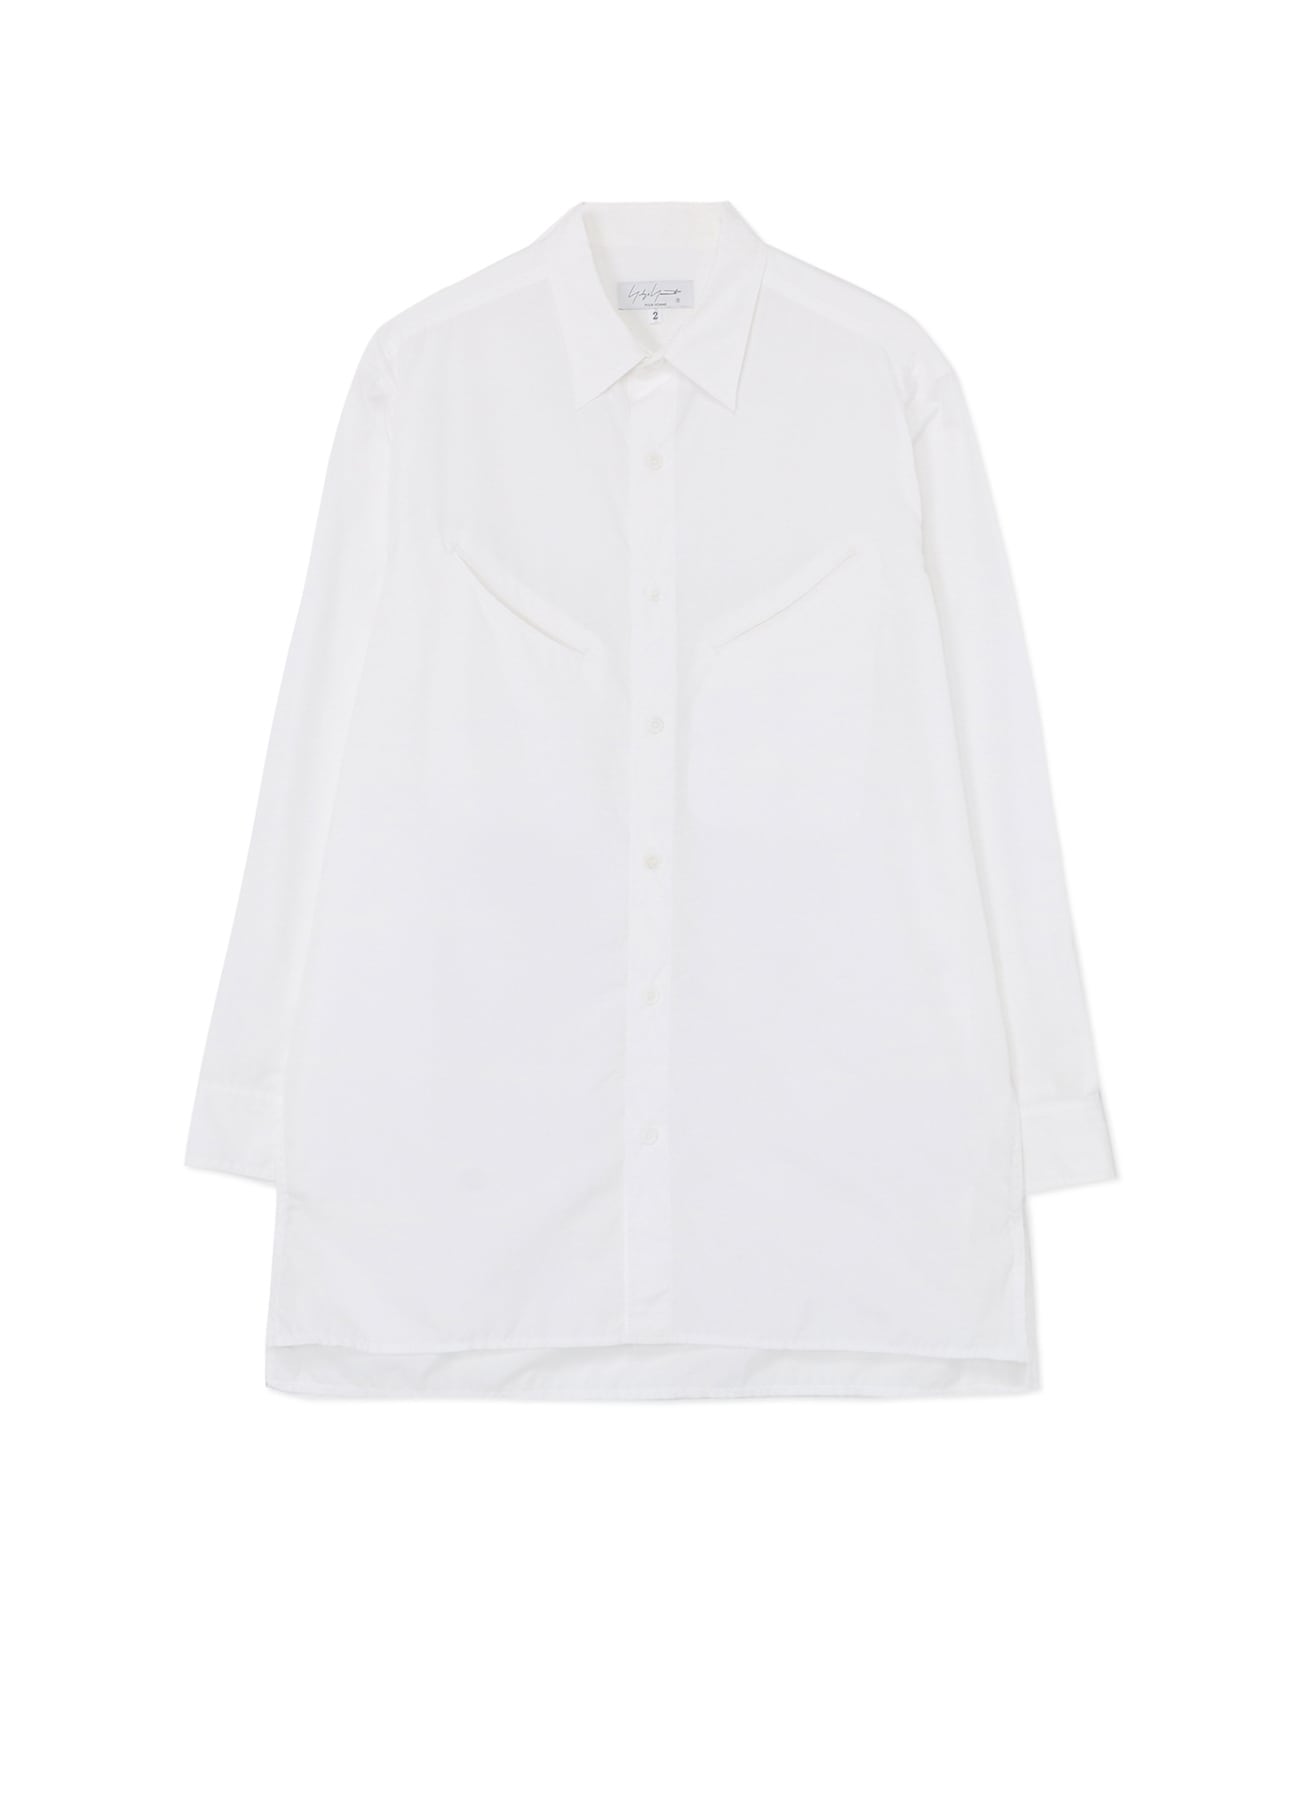 SHIRT WITH SLANTED CHEST POCKETS